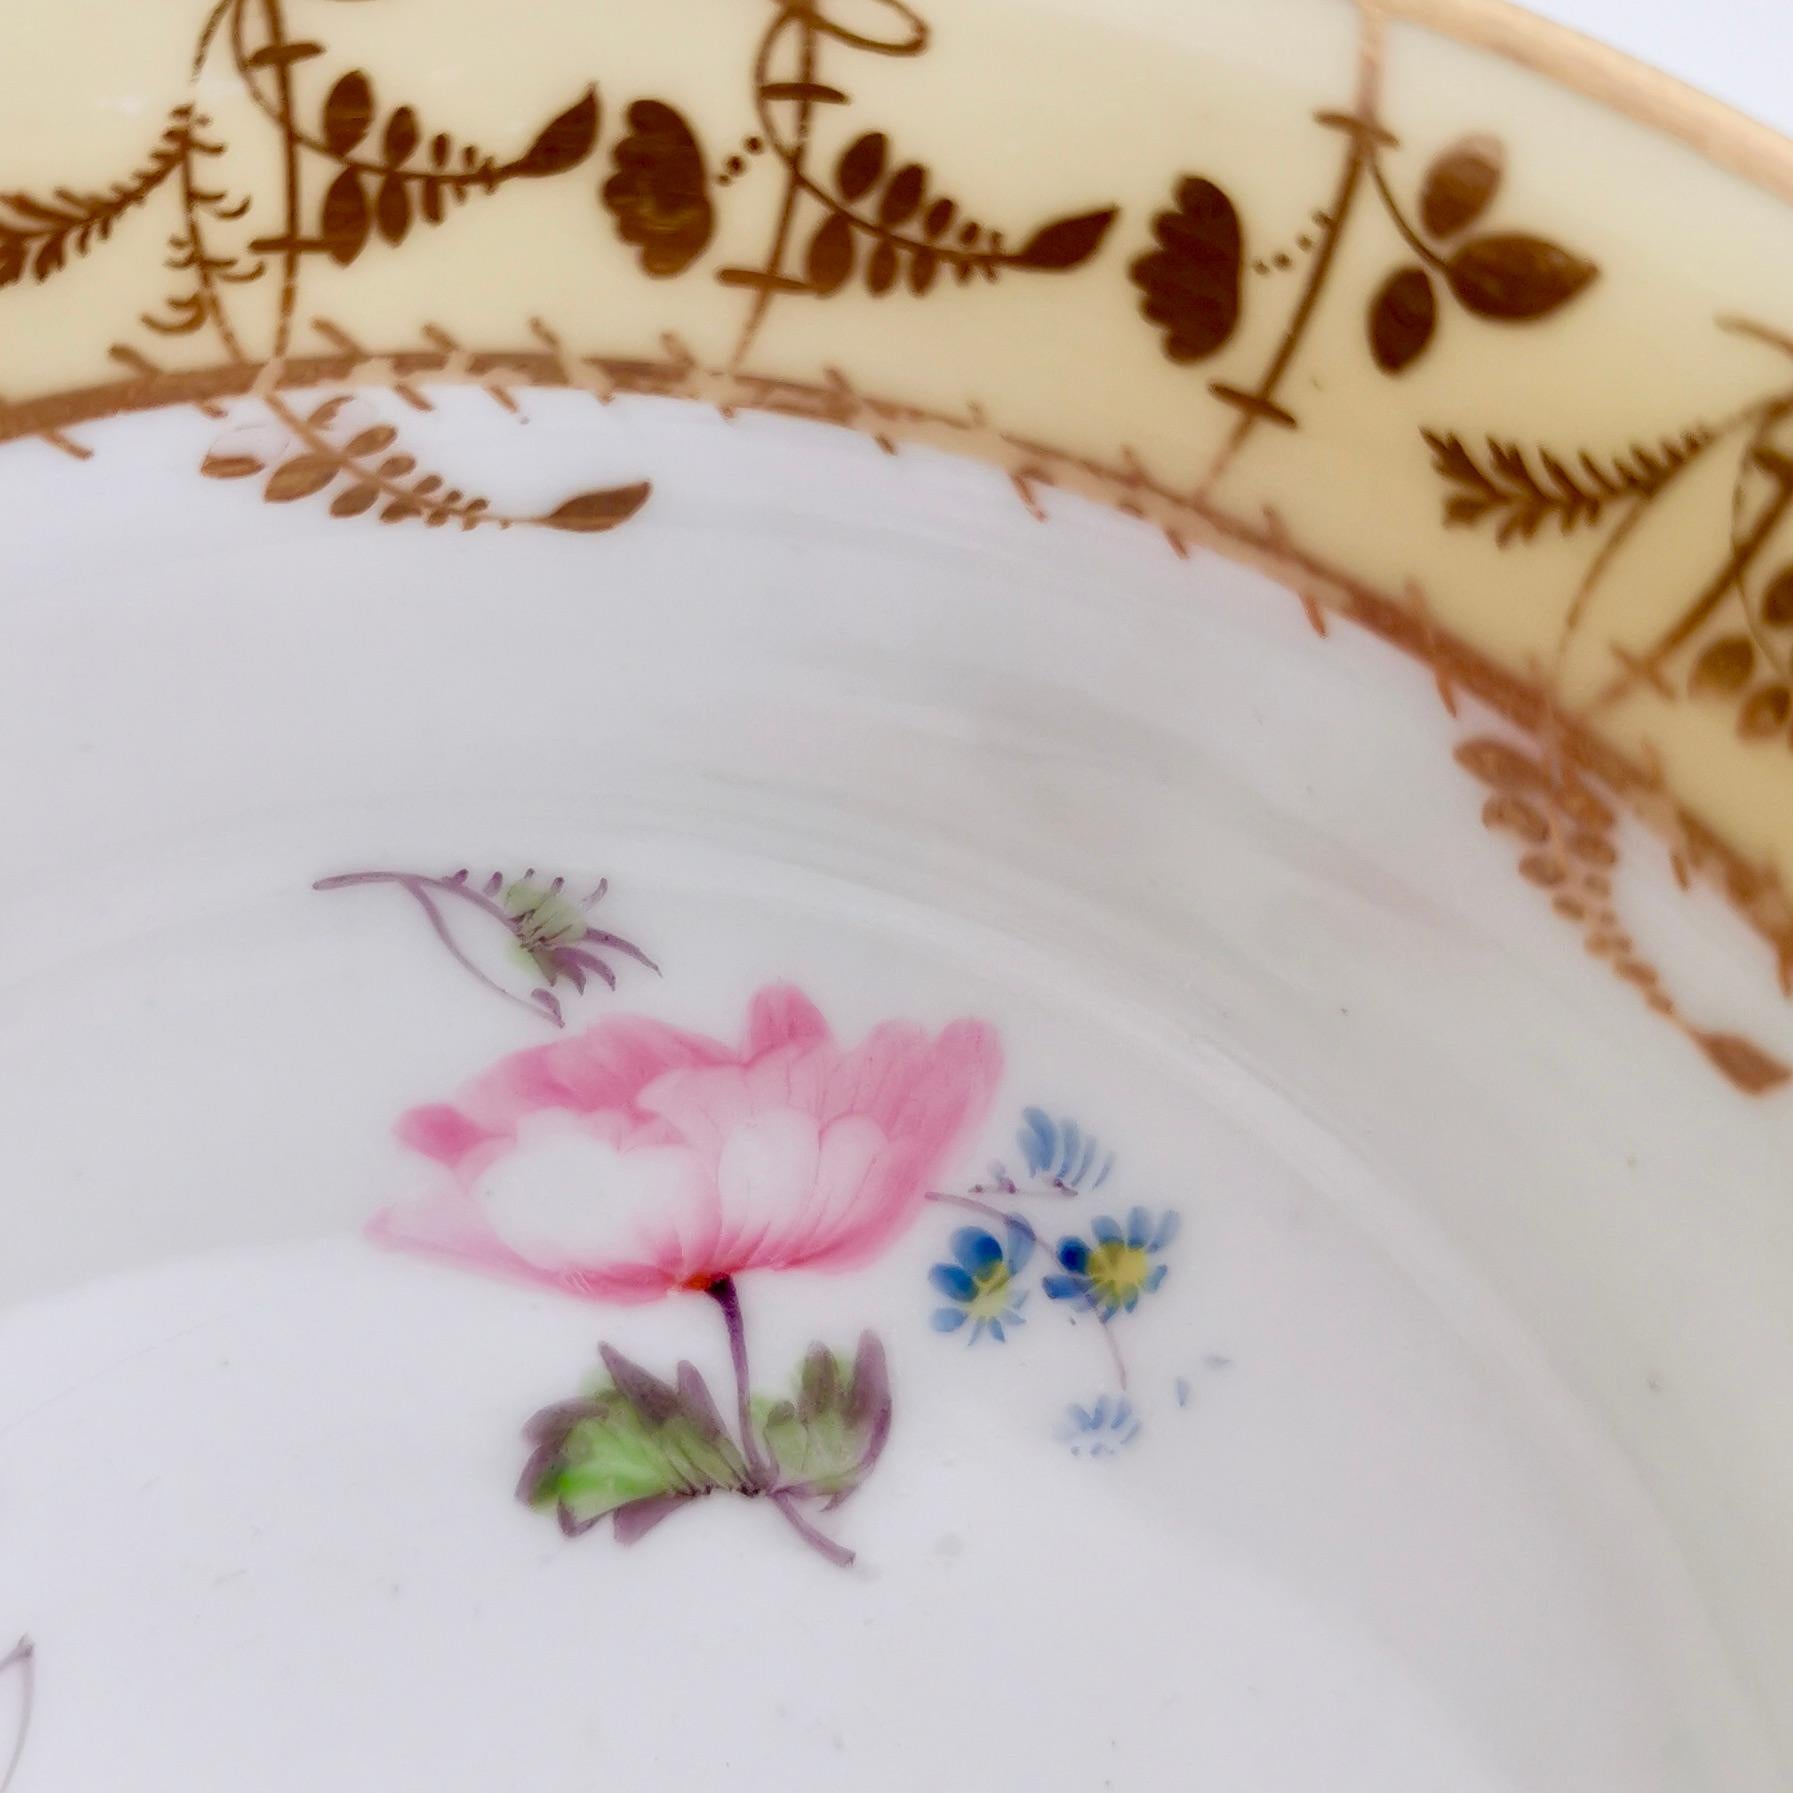 Minton Porcelain Teacup, Yellow with Hand Painted Flowers, Regency, circa 1825 3